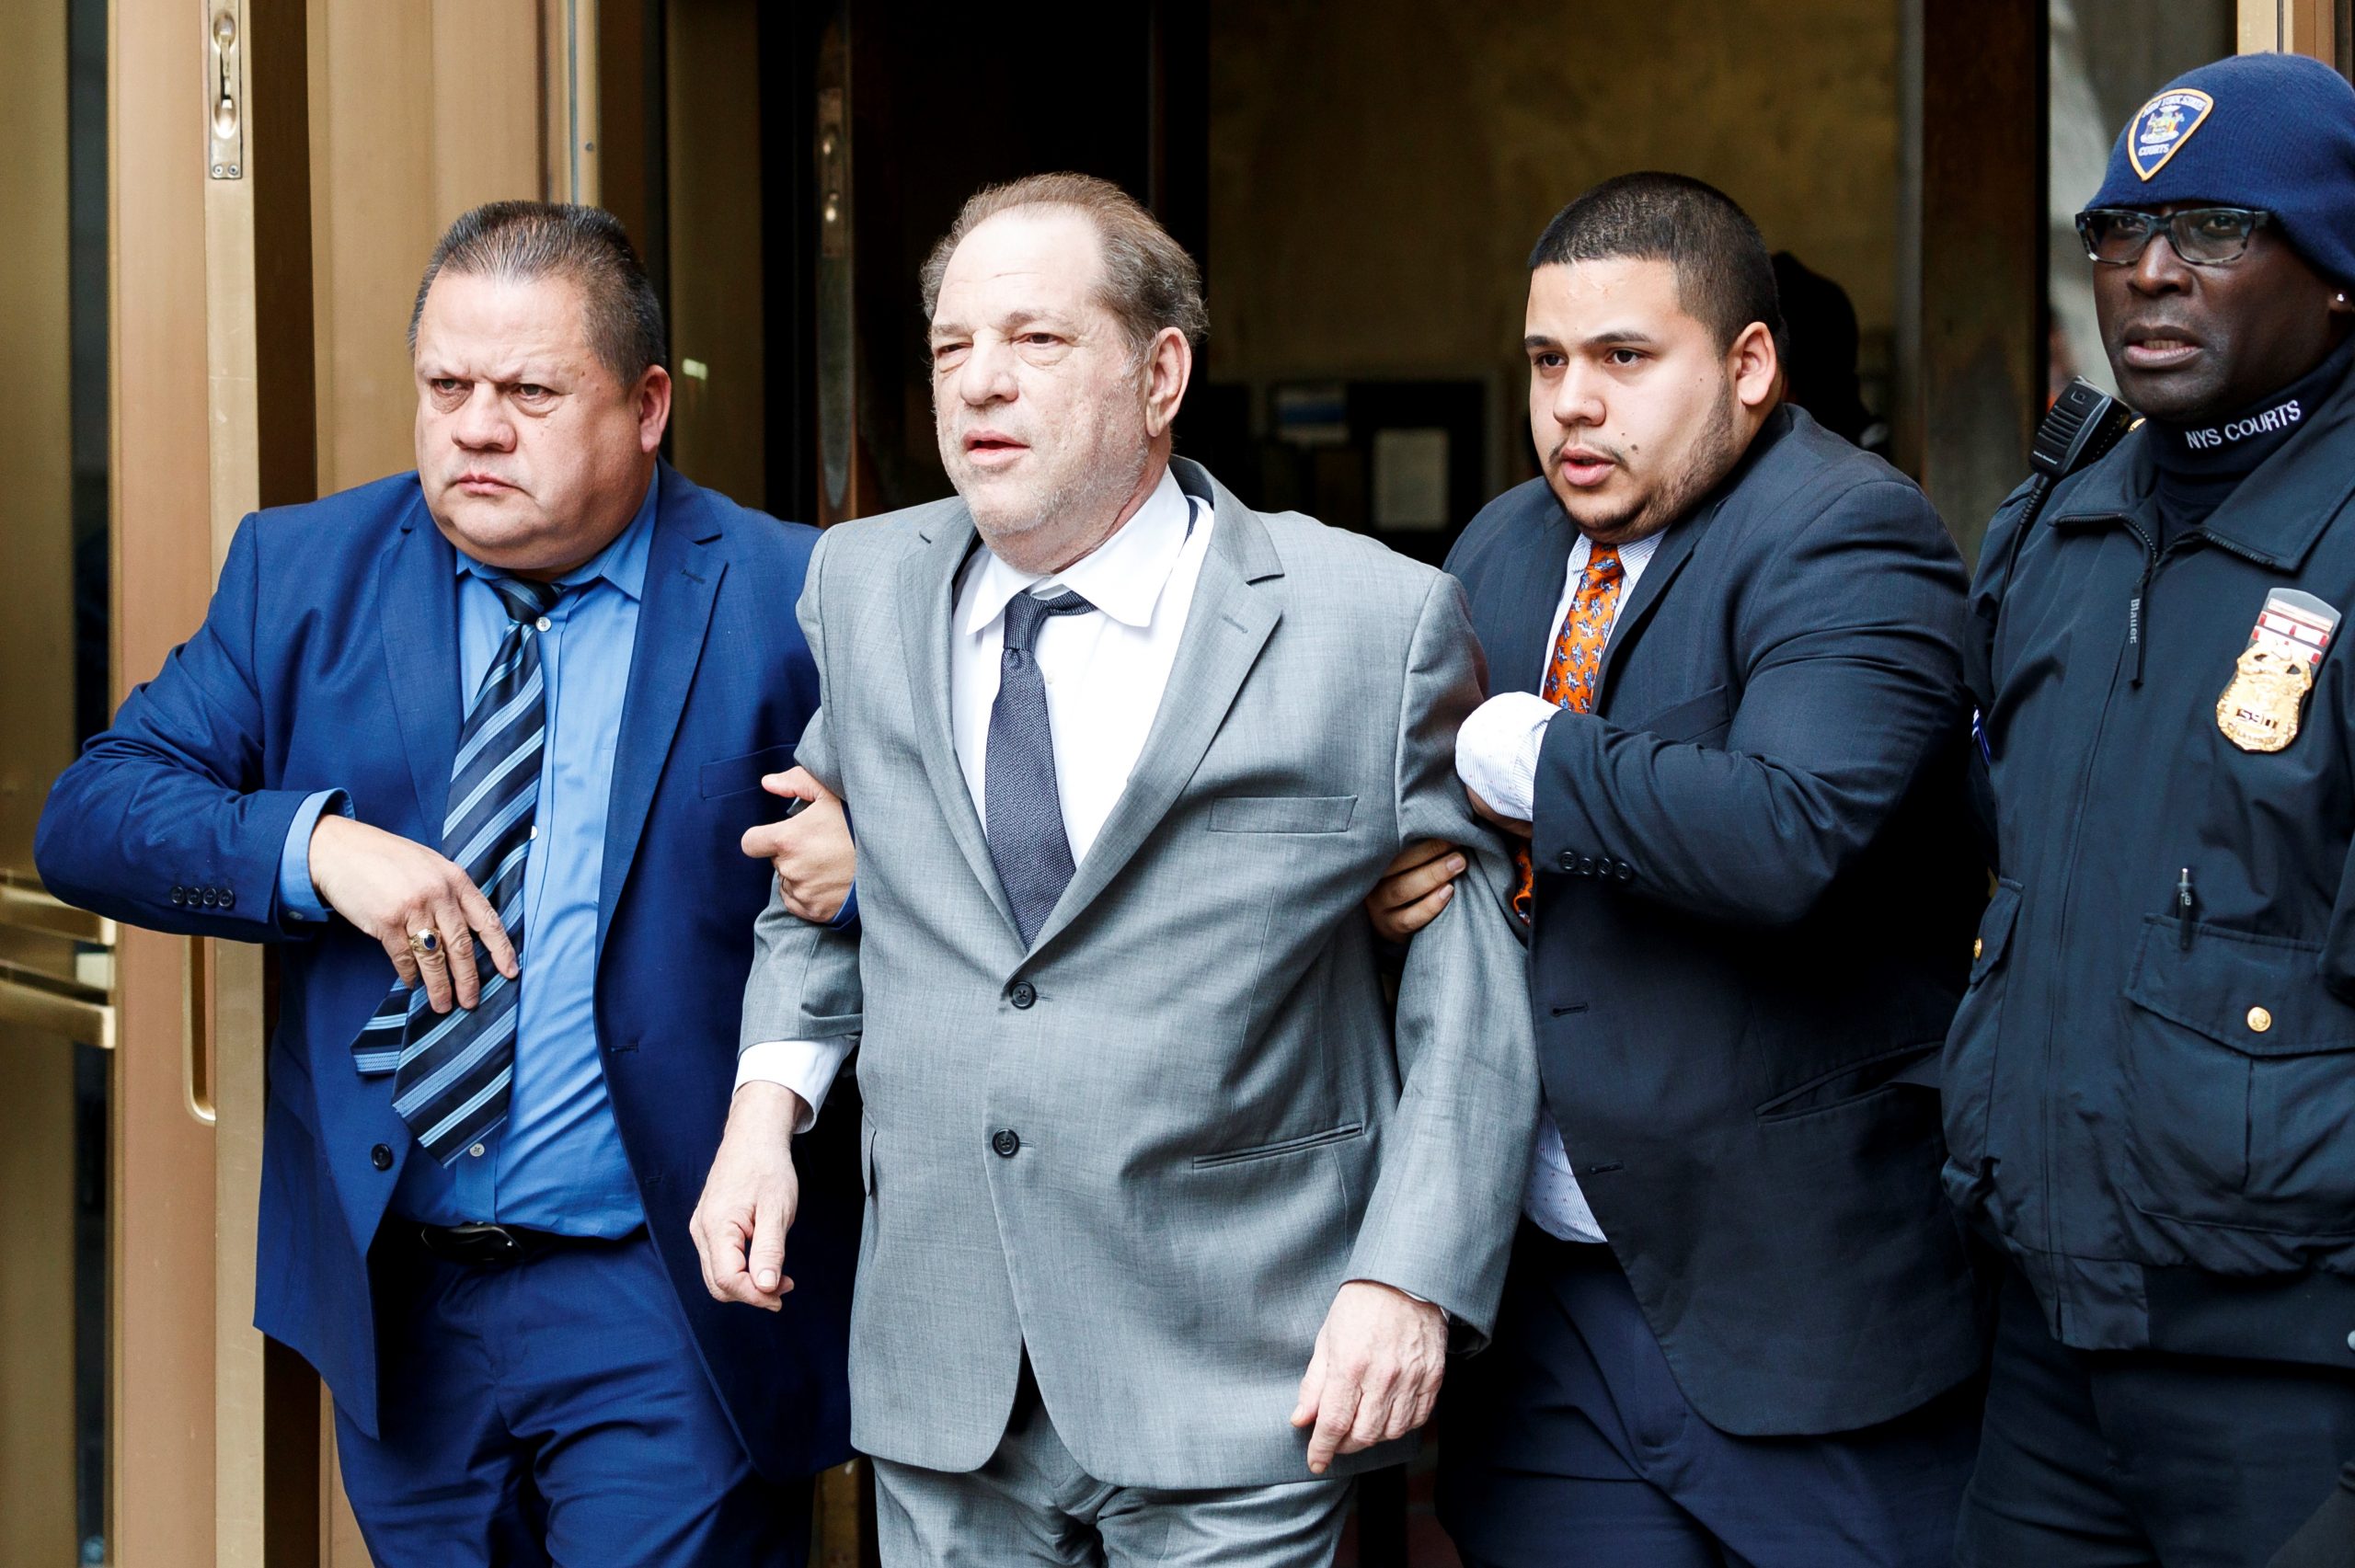 epa08049344 Former movie producer Harvey Weinstein (2-L) departs New York State Supreme Court  following a bail hearing related to his upcoming trial on charges of rape and sexual assault at in New York, New York, USA, 06 December 2019. Weinstein's trial is scheduled to start early next month.  EPA/JUSTIN LANE